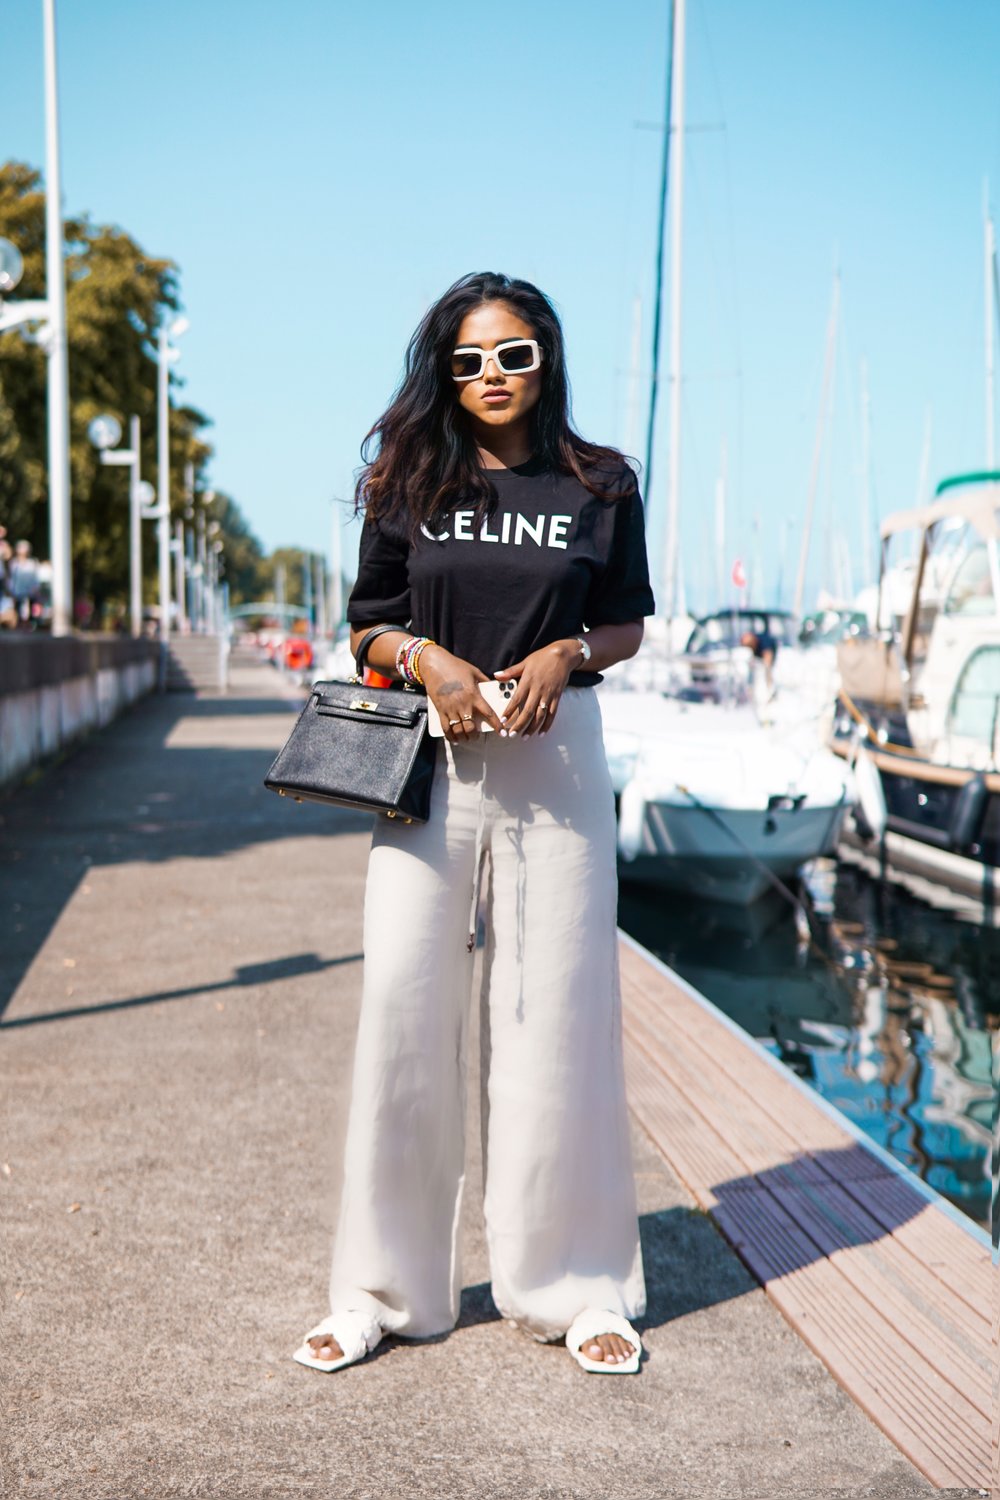 Sachini at a harbour in front of boots wearing a black Celine top and beige trousers holding a black Hermès Kelly bag